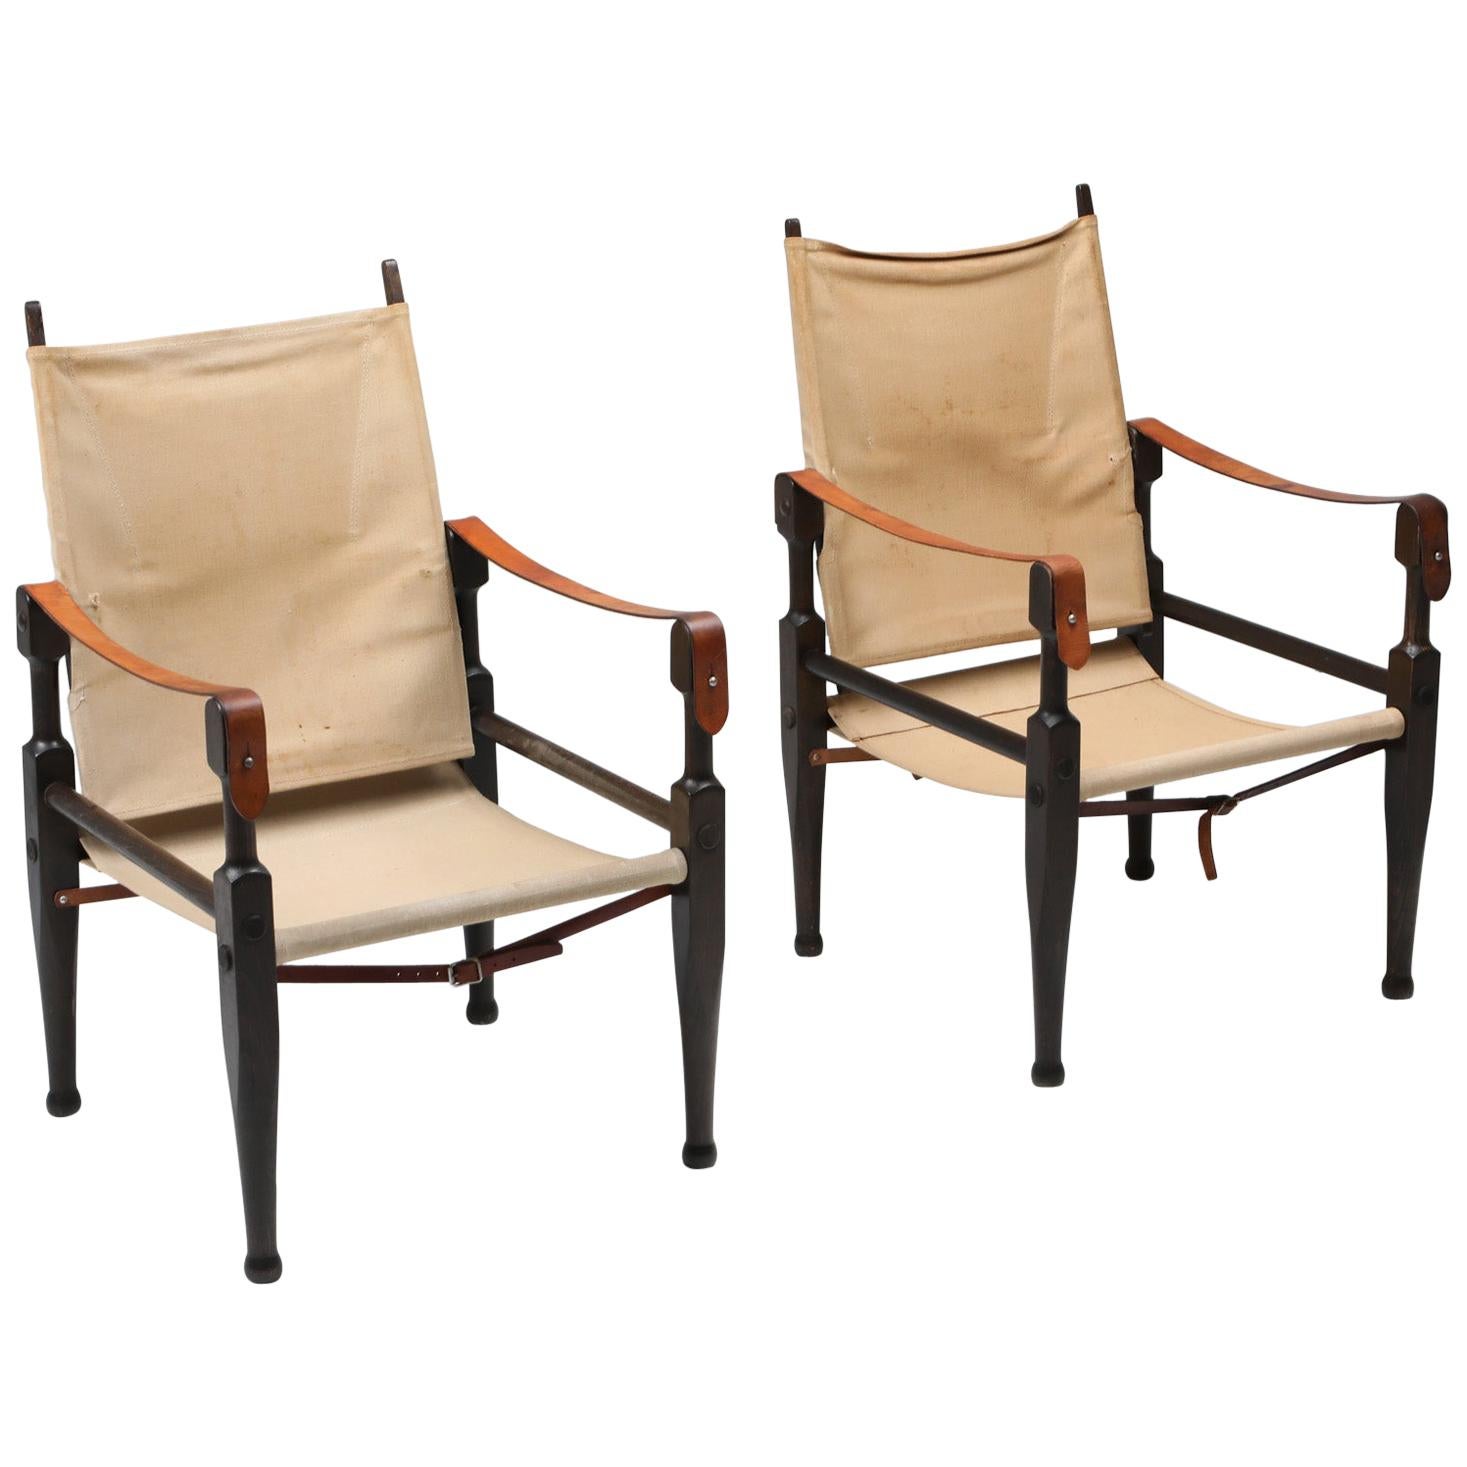 Kaare Klint, safari chairs, Denmark

Danish canvas and leather safari chairs
Full original pieces which show signs of patina and wear.
We do have an in house re-upholstery service in case you don't prefer the original condition.
          